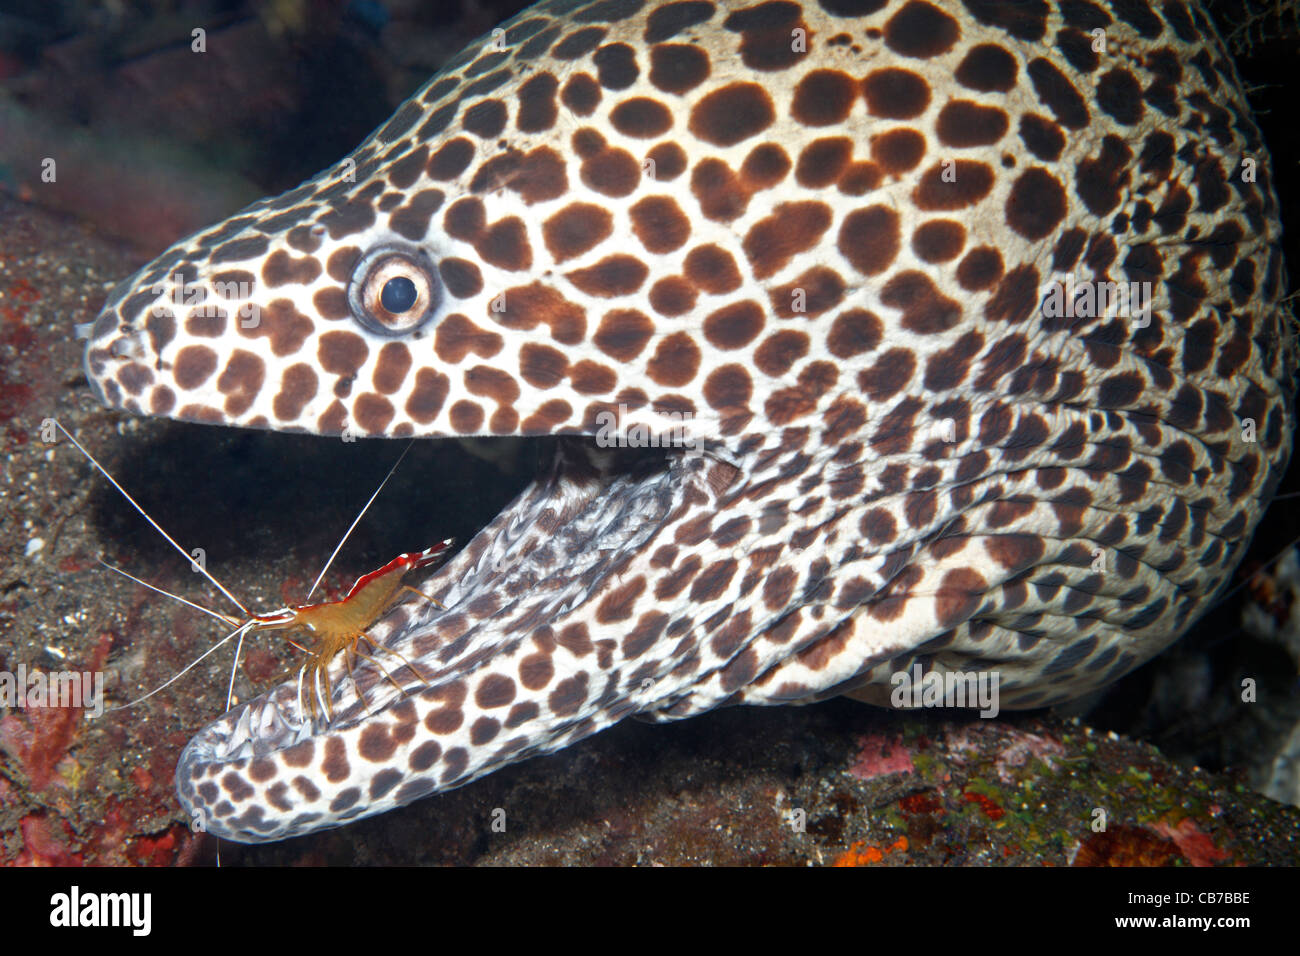 Honeycomb Moray Eel, also called Leopard moray eel, Gymnothorax favagineus, having teeth cleaned by Cleaner Shrimp, Lysmata amboinensis. Stock Photo